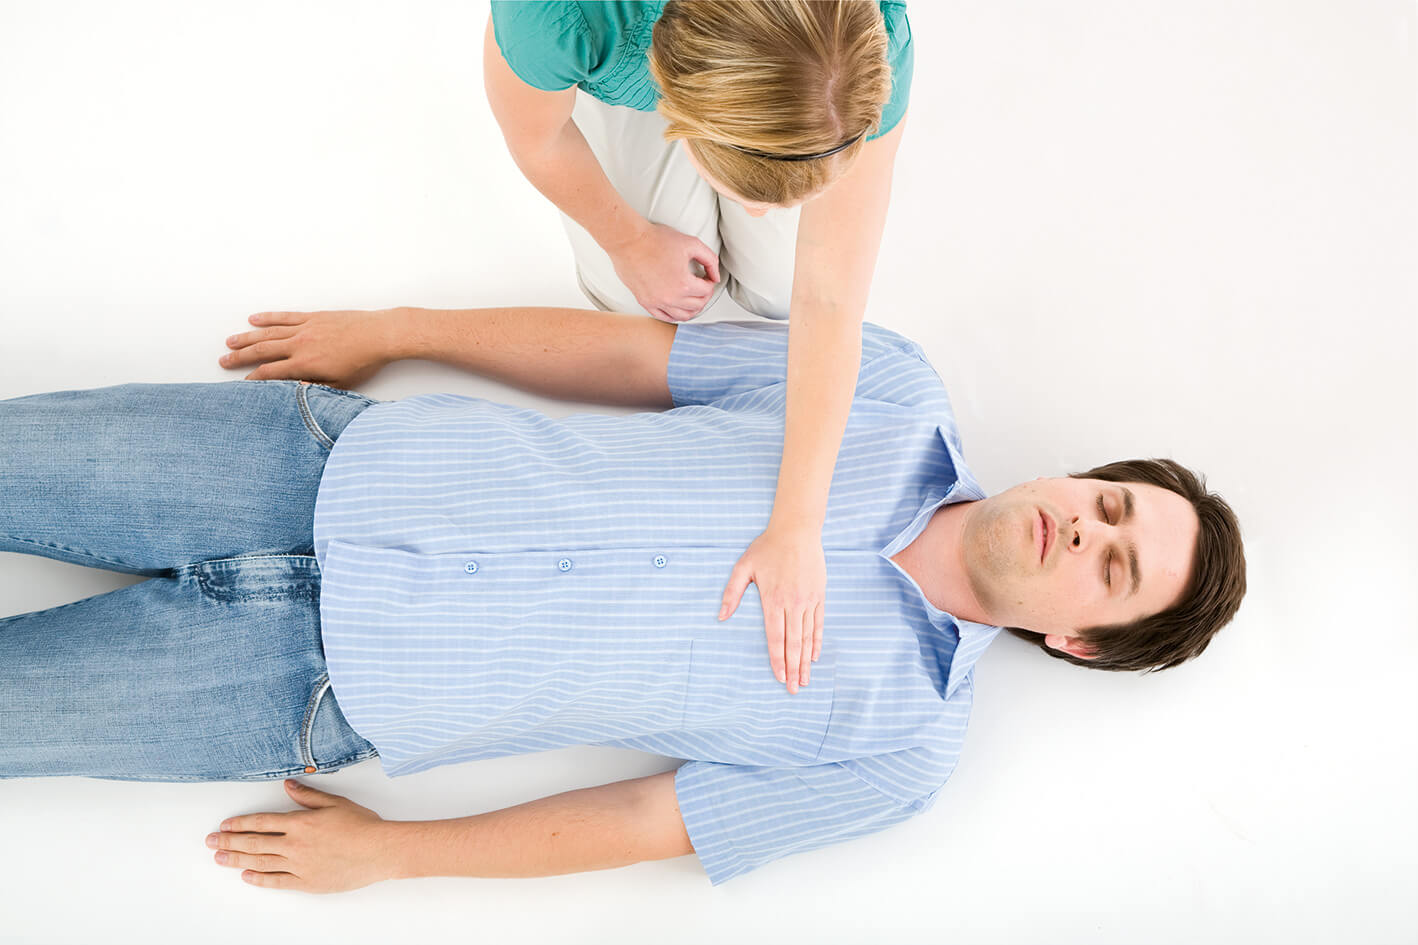 Heart massage: how to give first aid?